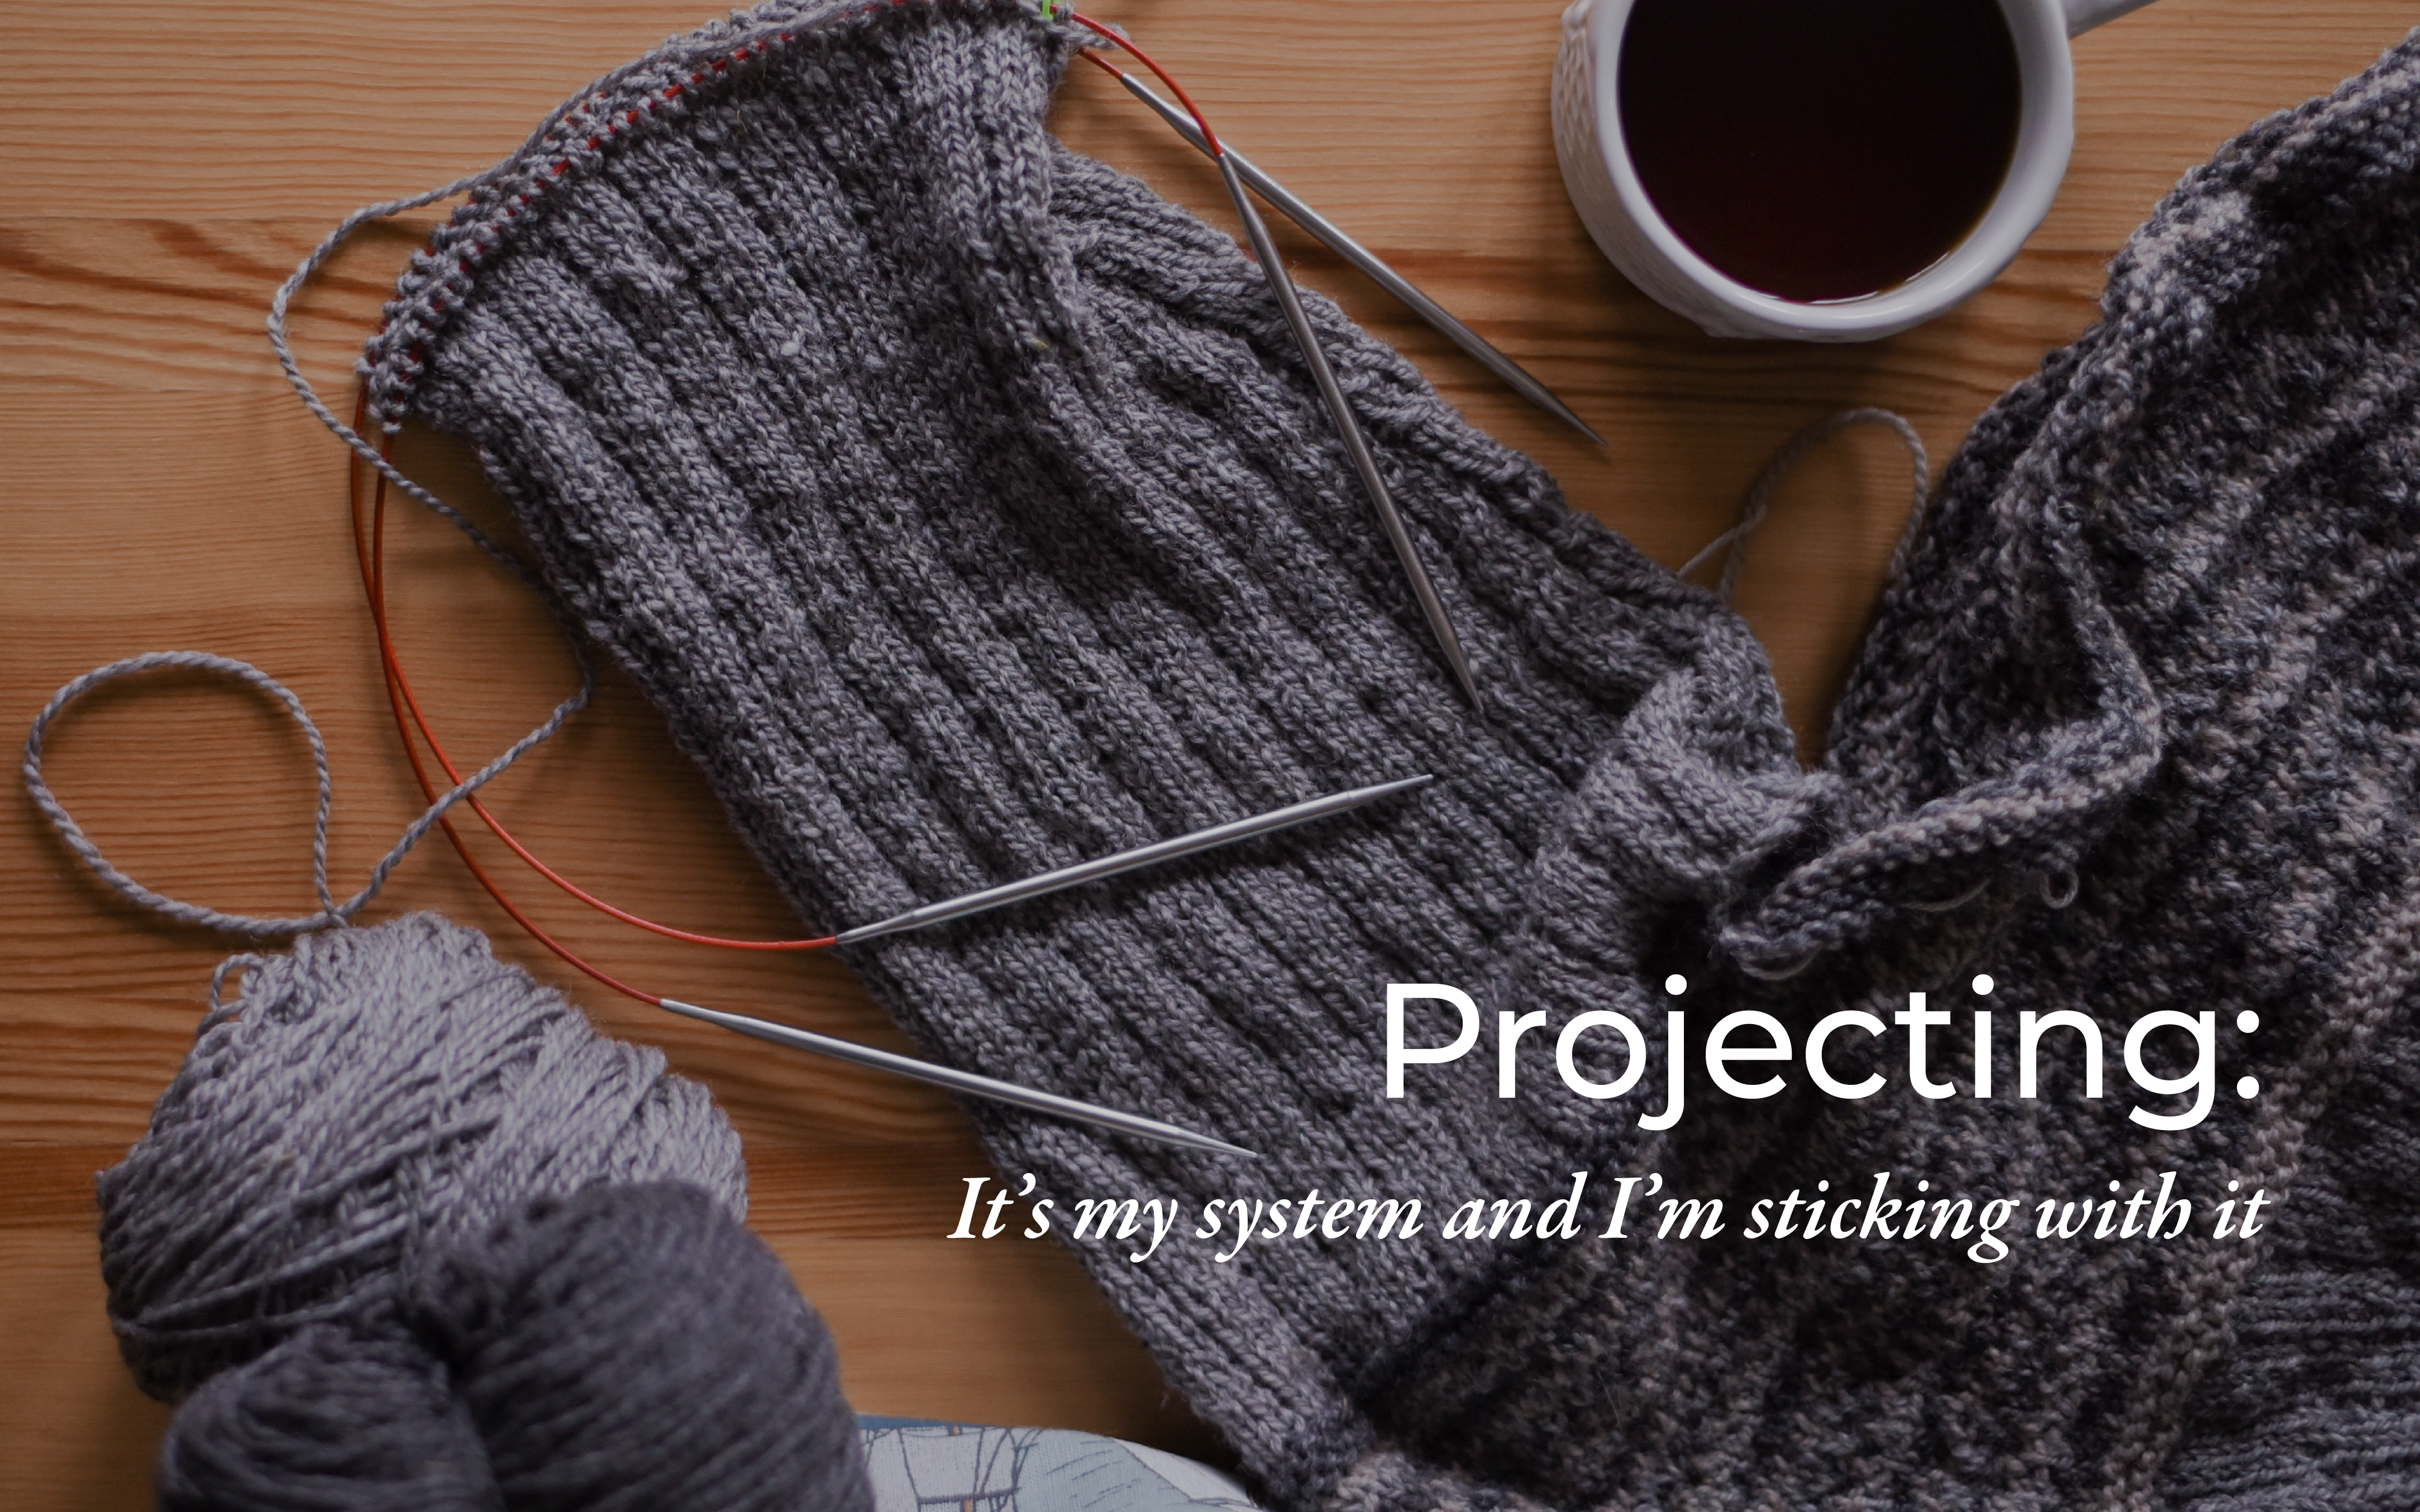 Projecting: It's my system and I'm sticking with it